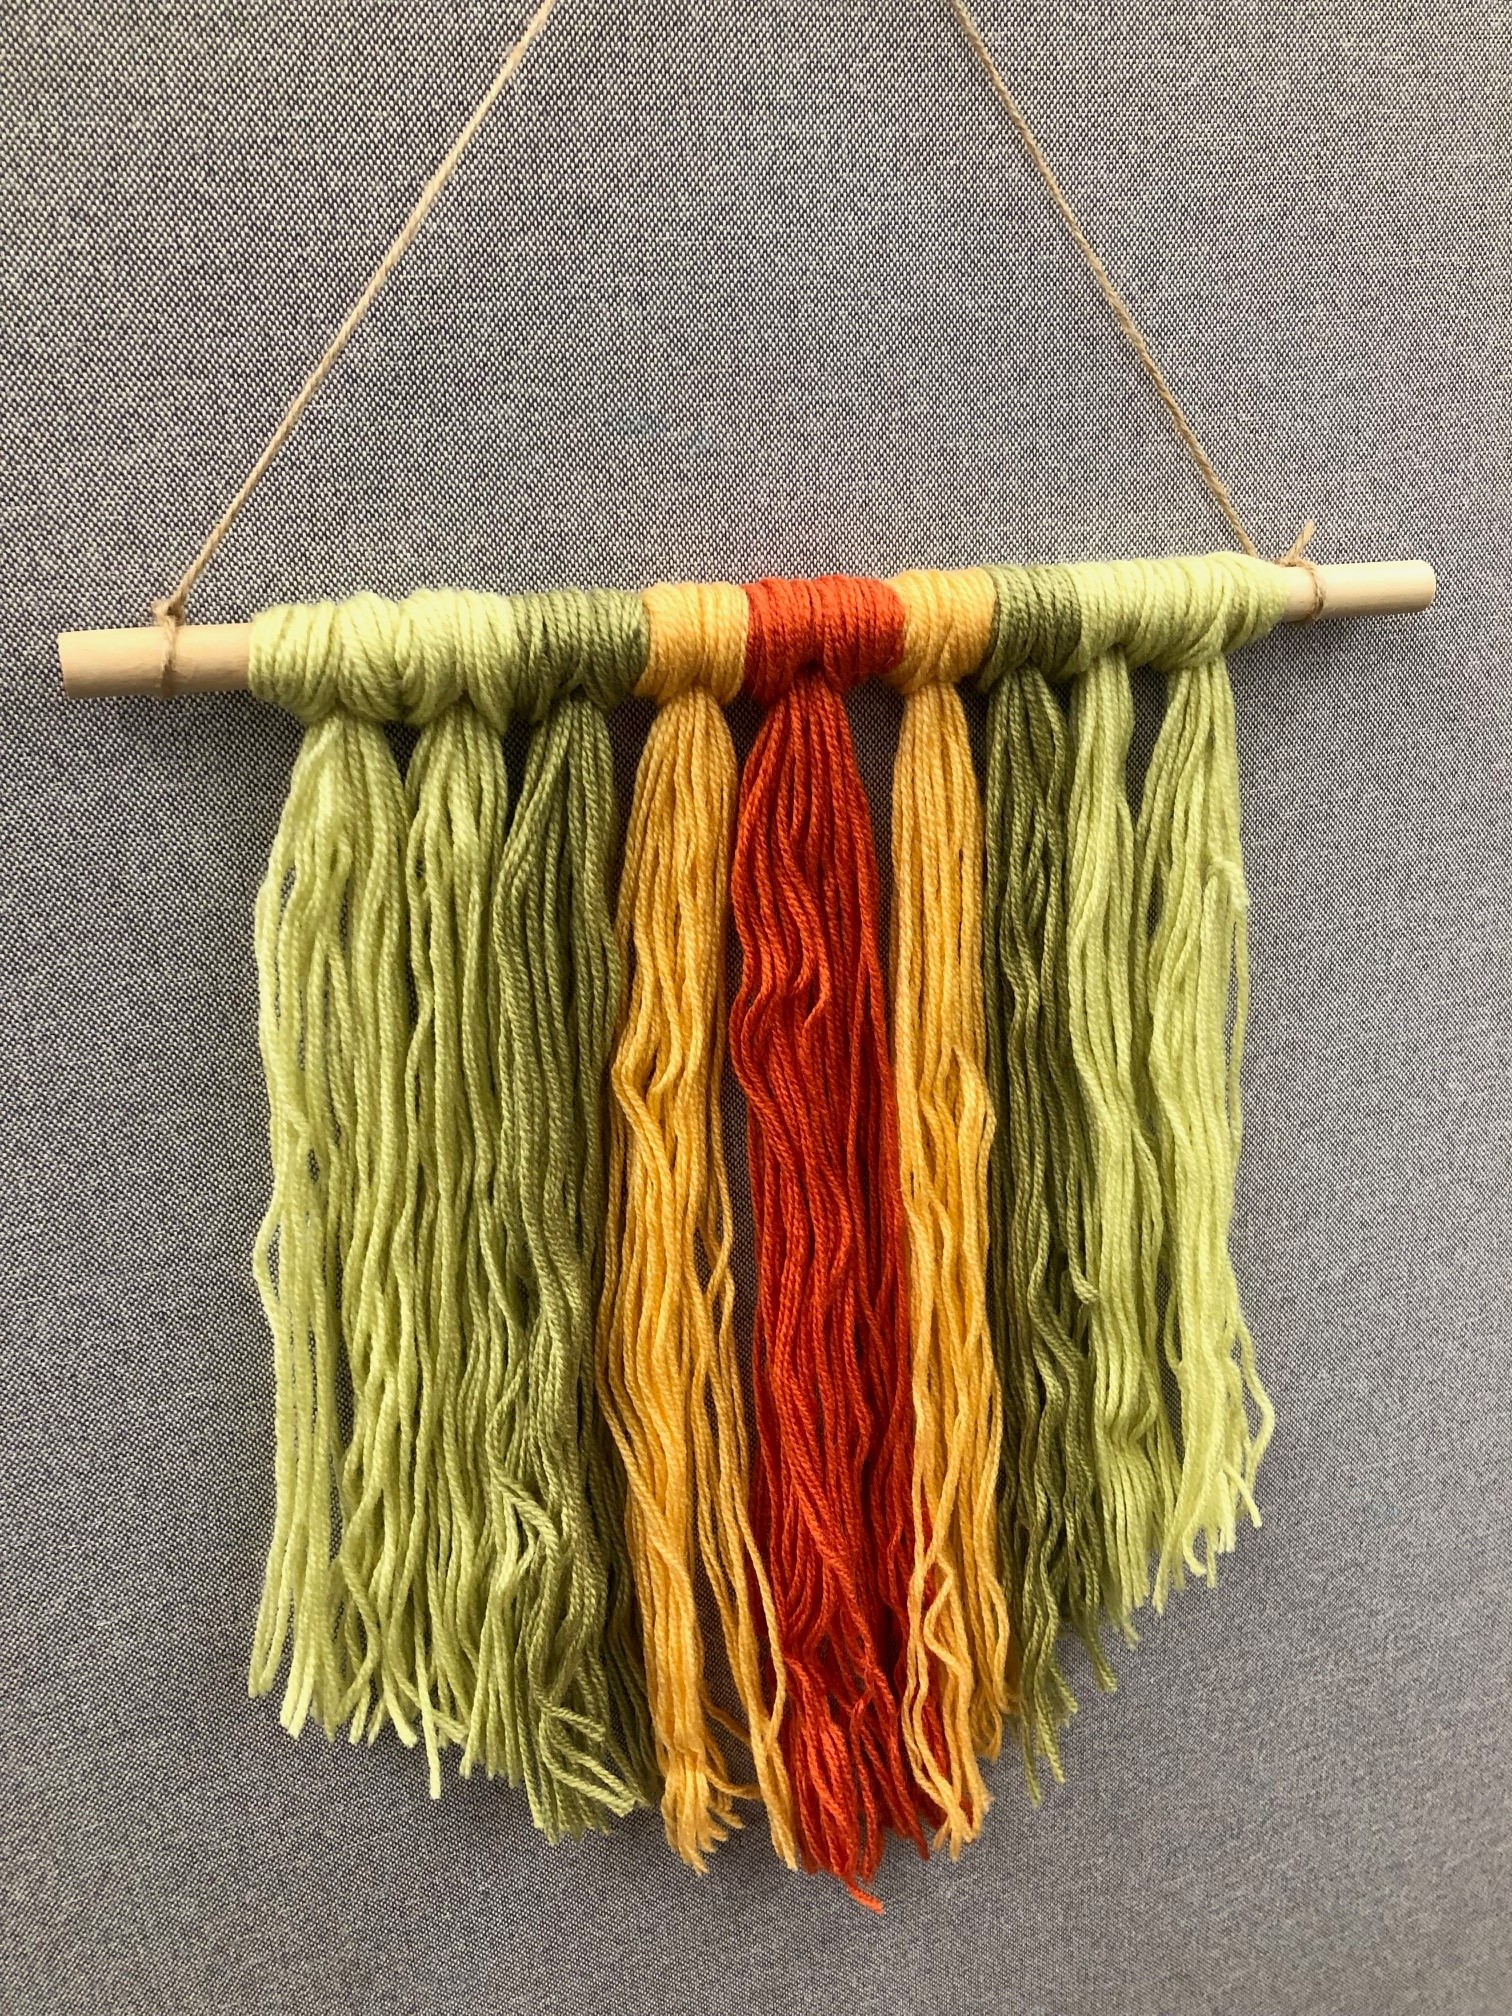 wooden dowel with green, yellow, orange yarn tied to it